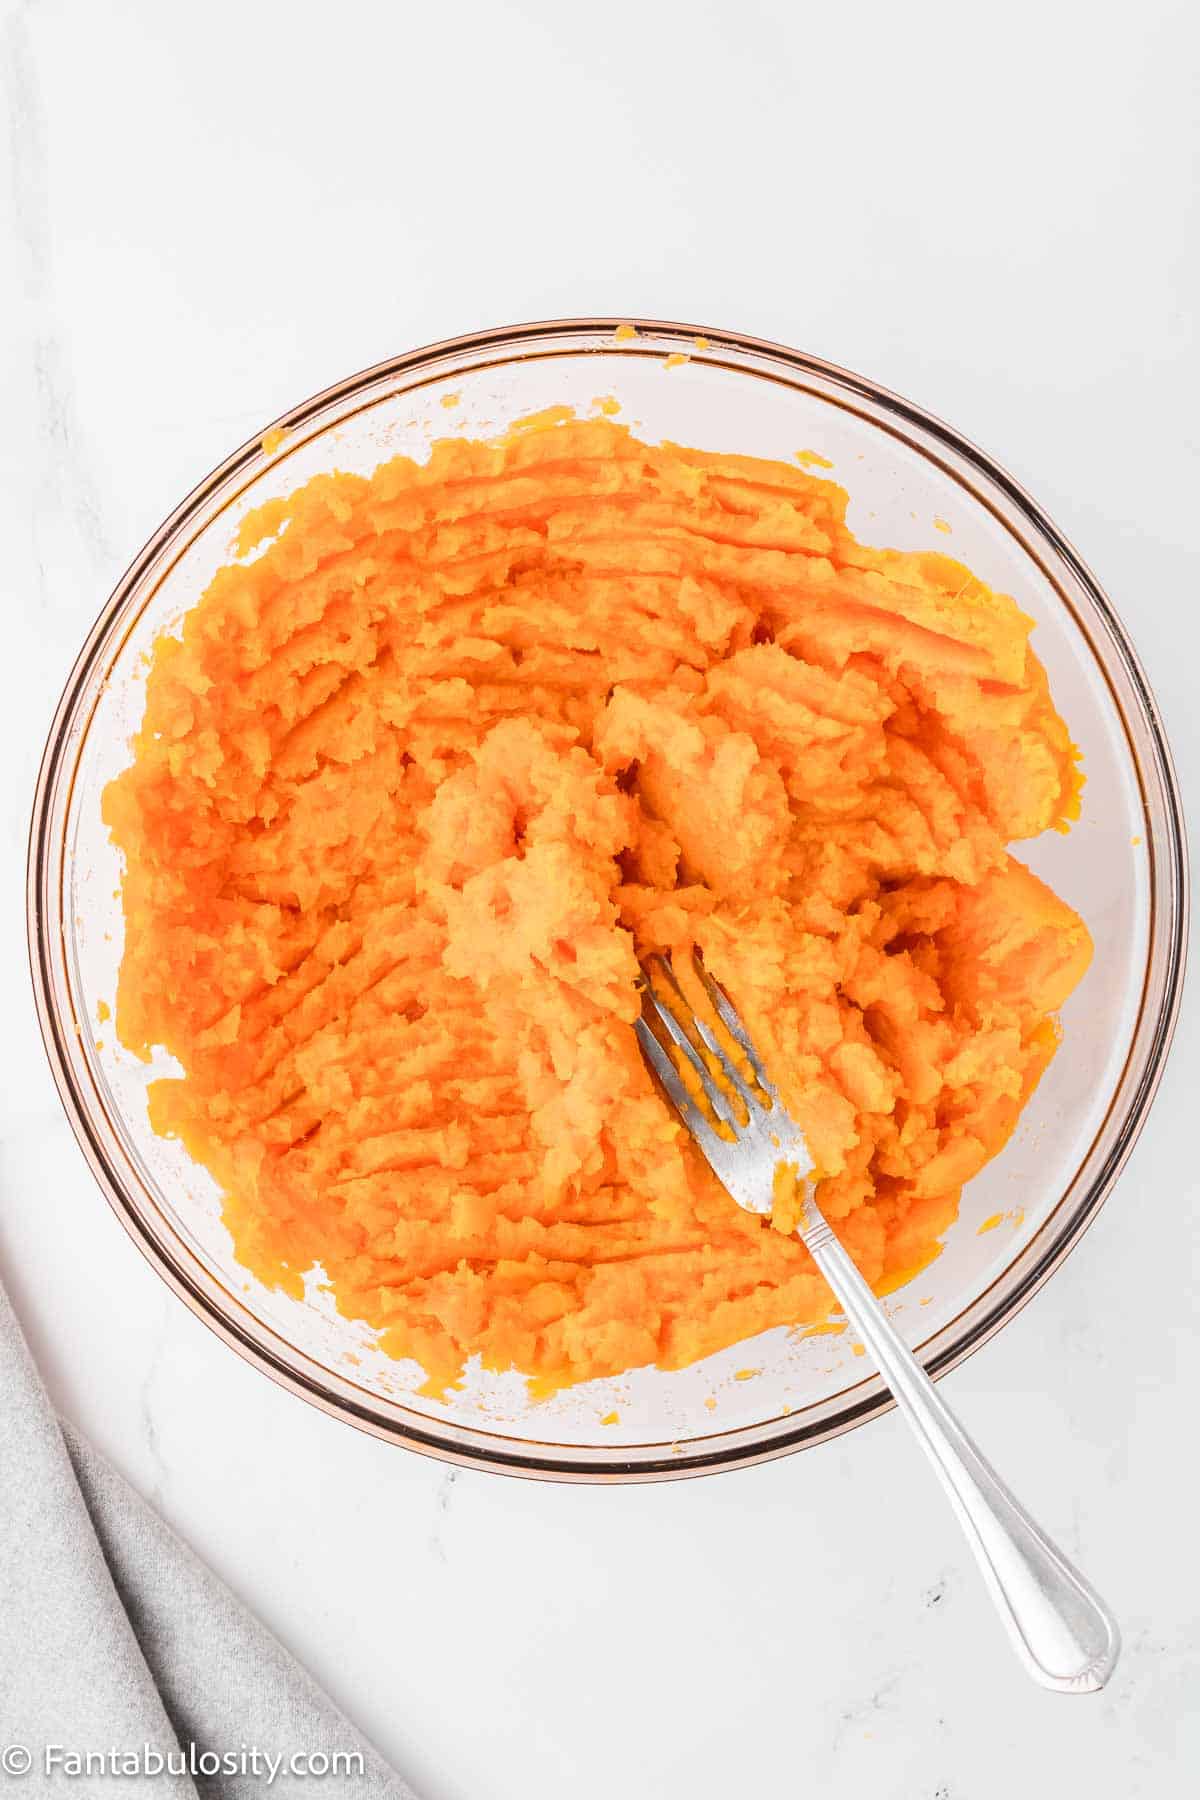 Mashed sweet potatoes in clear glass bowl.